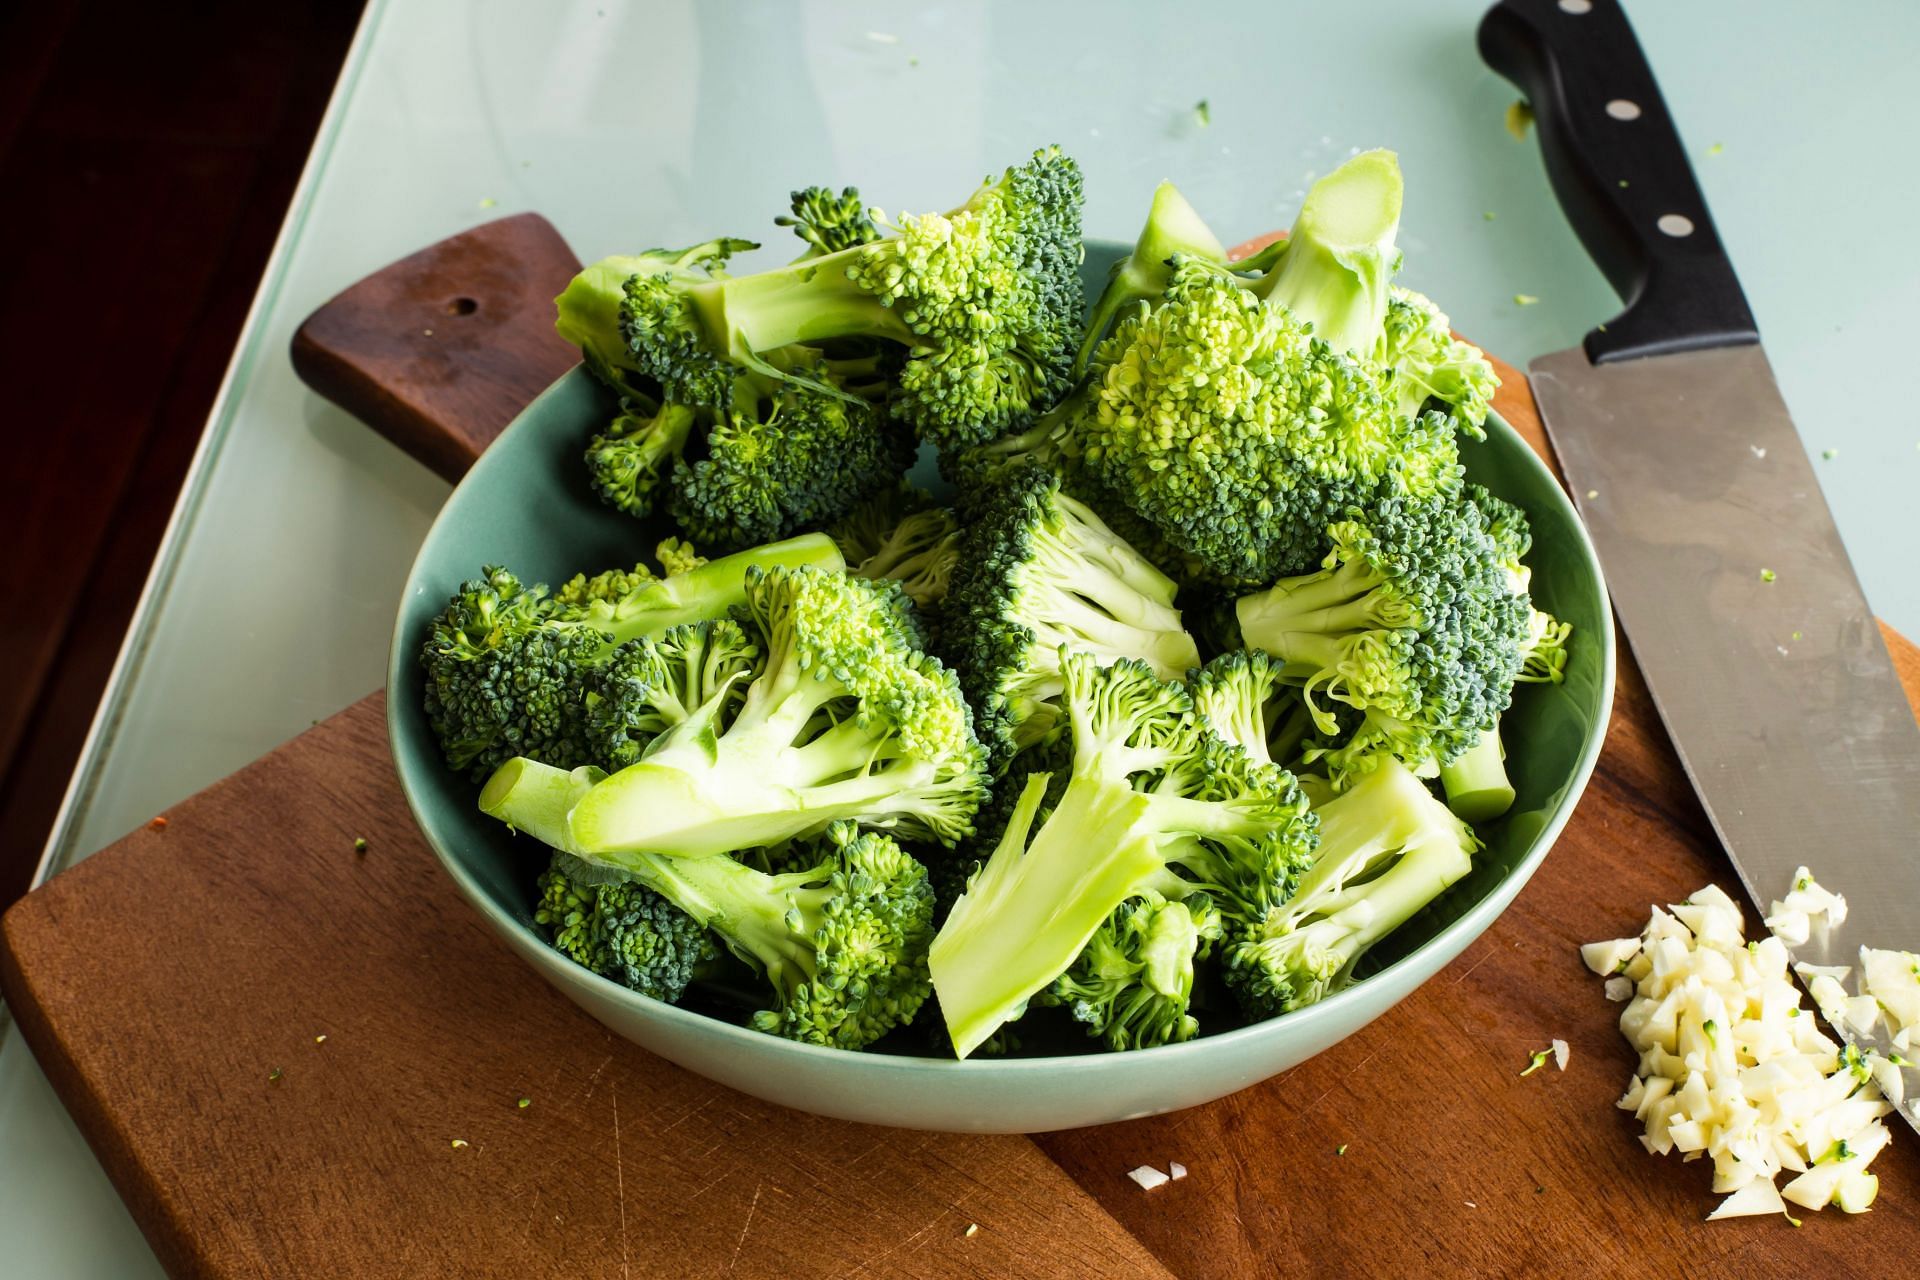 Calories and nutrients in broccoli and their health benefits (Image via Unsplash/Louis Hansel)